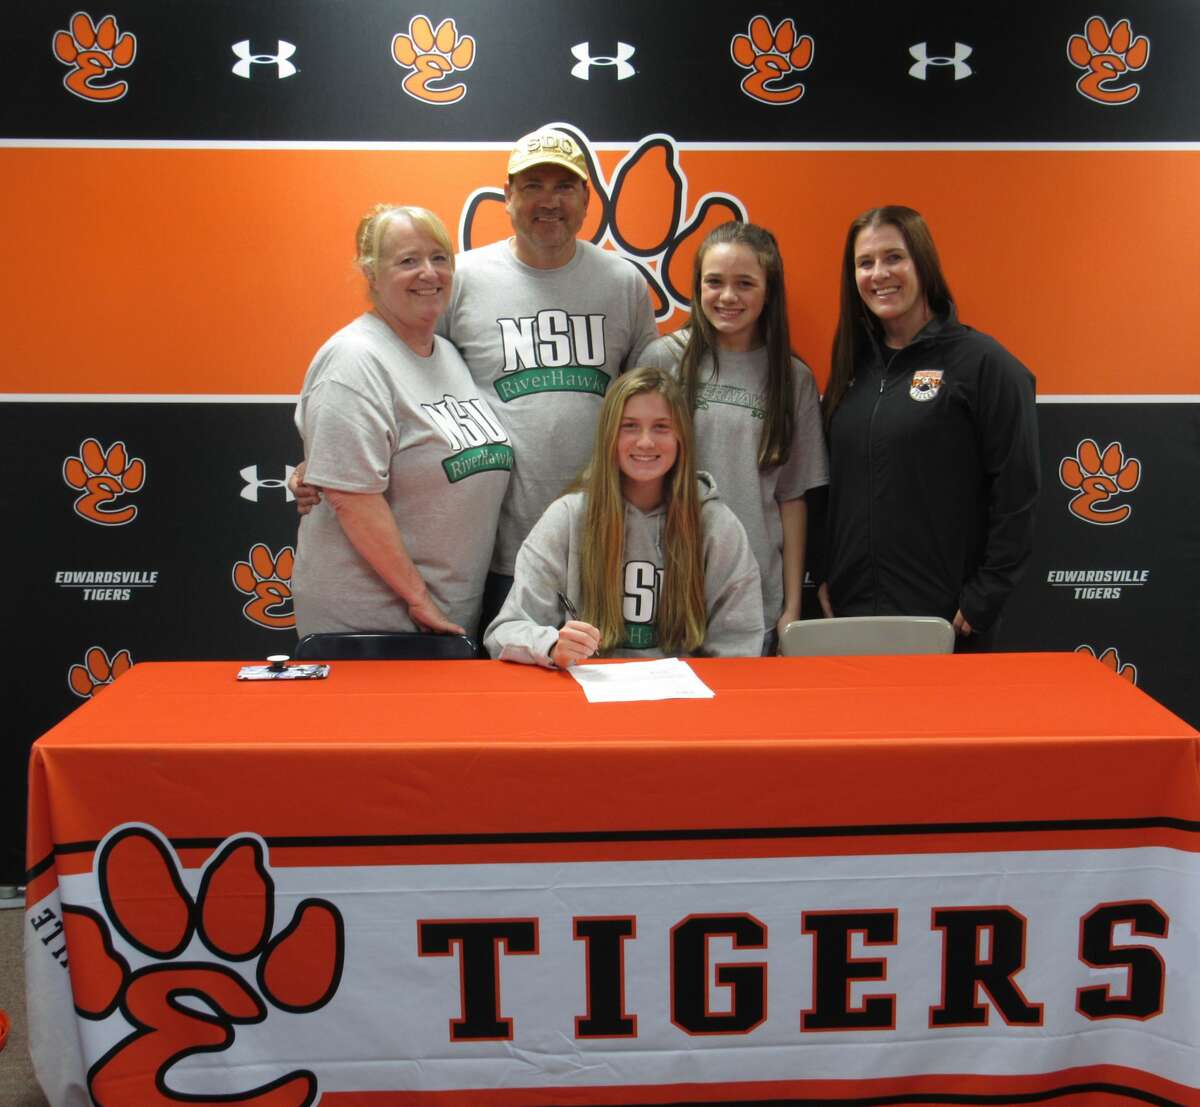 Jadyn Renth, seated center, was joined by her family and EHS girls soccer coach Abby Federmann as she signed to play soccer for Northeastern State University.